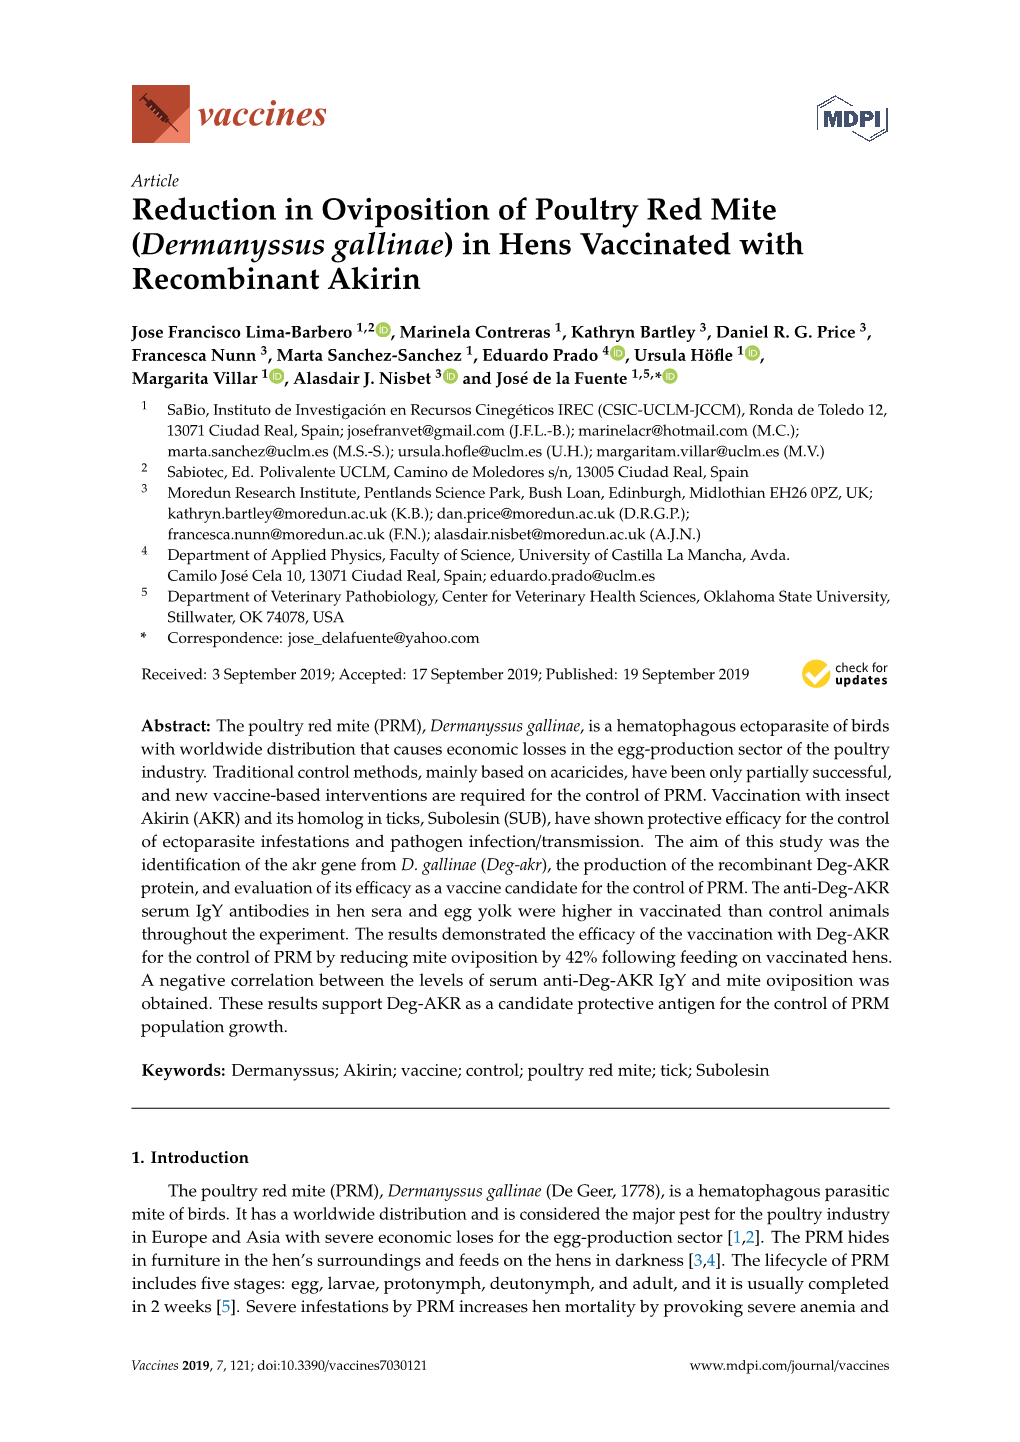 Dermanyssus Gallinae) in Hens Vaccinated with Recombinant Akirin